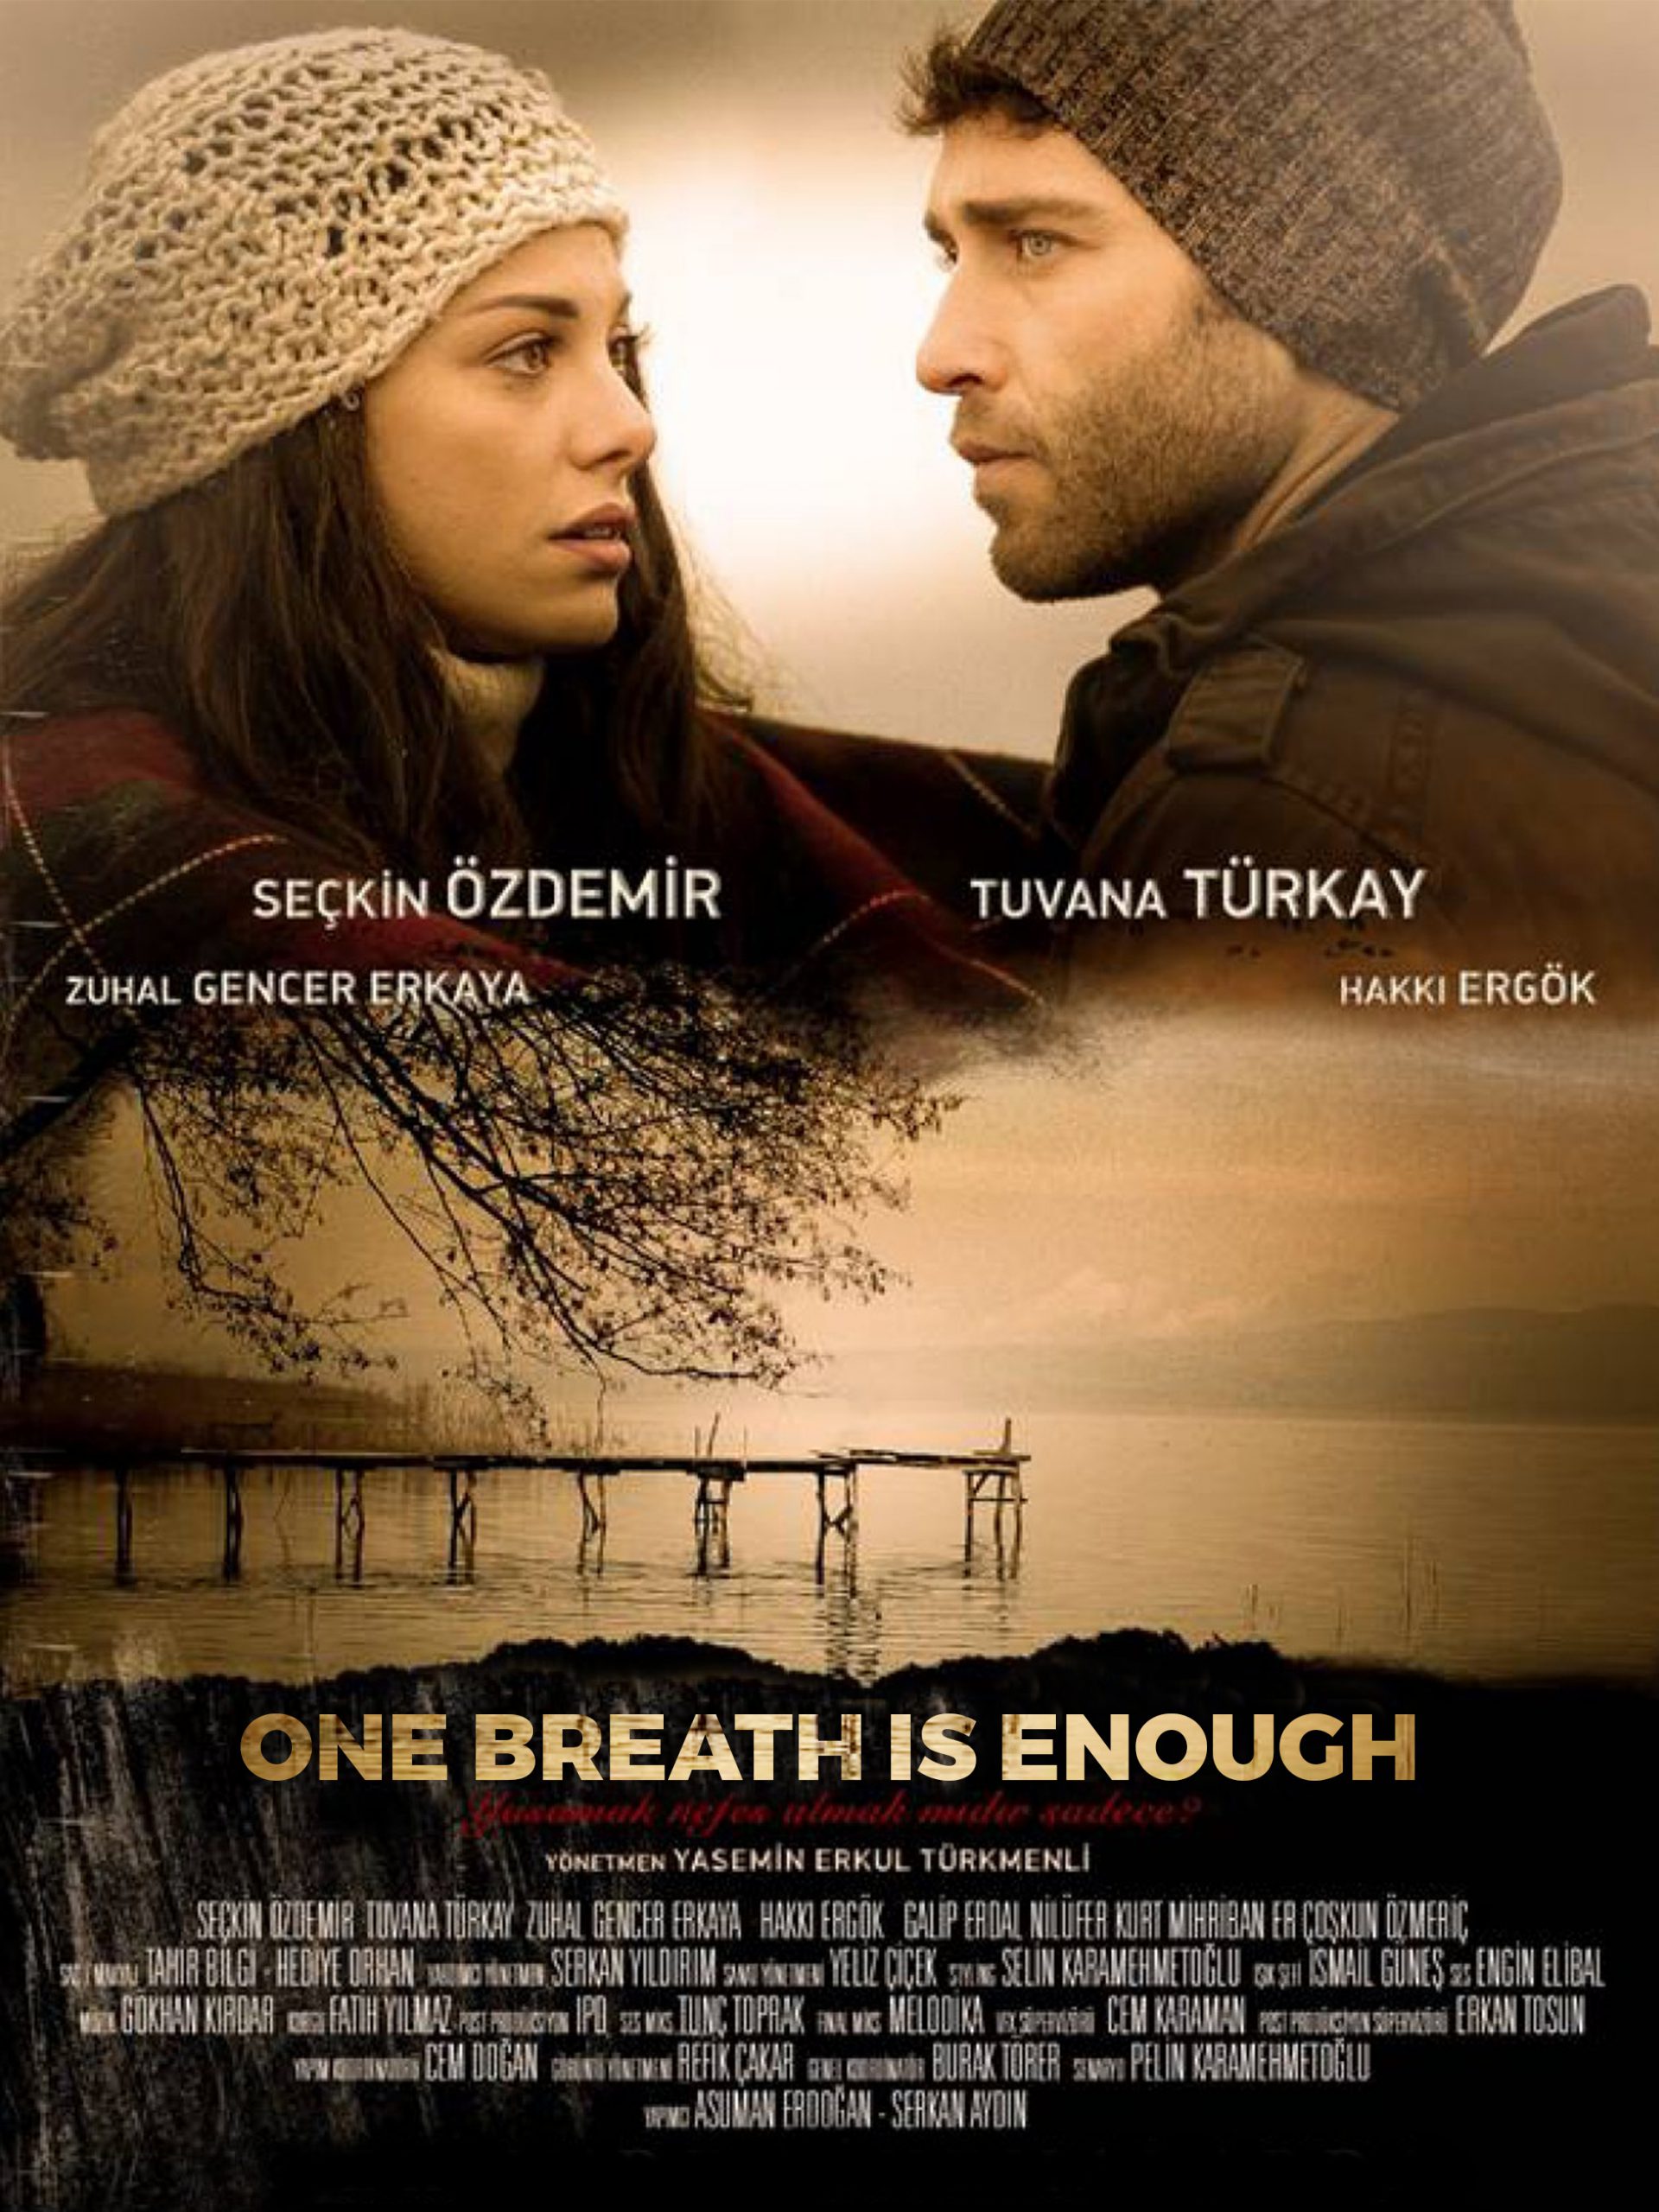 One Breath is Enough